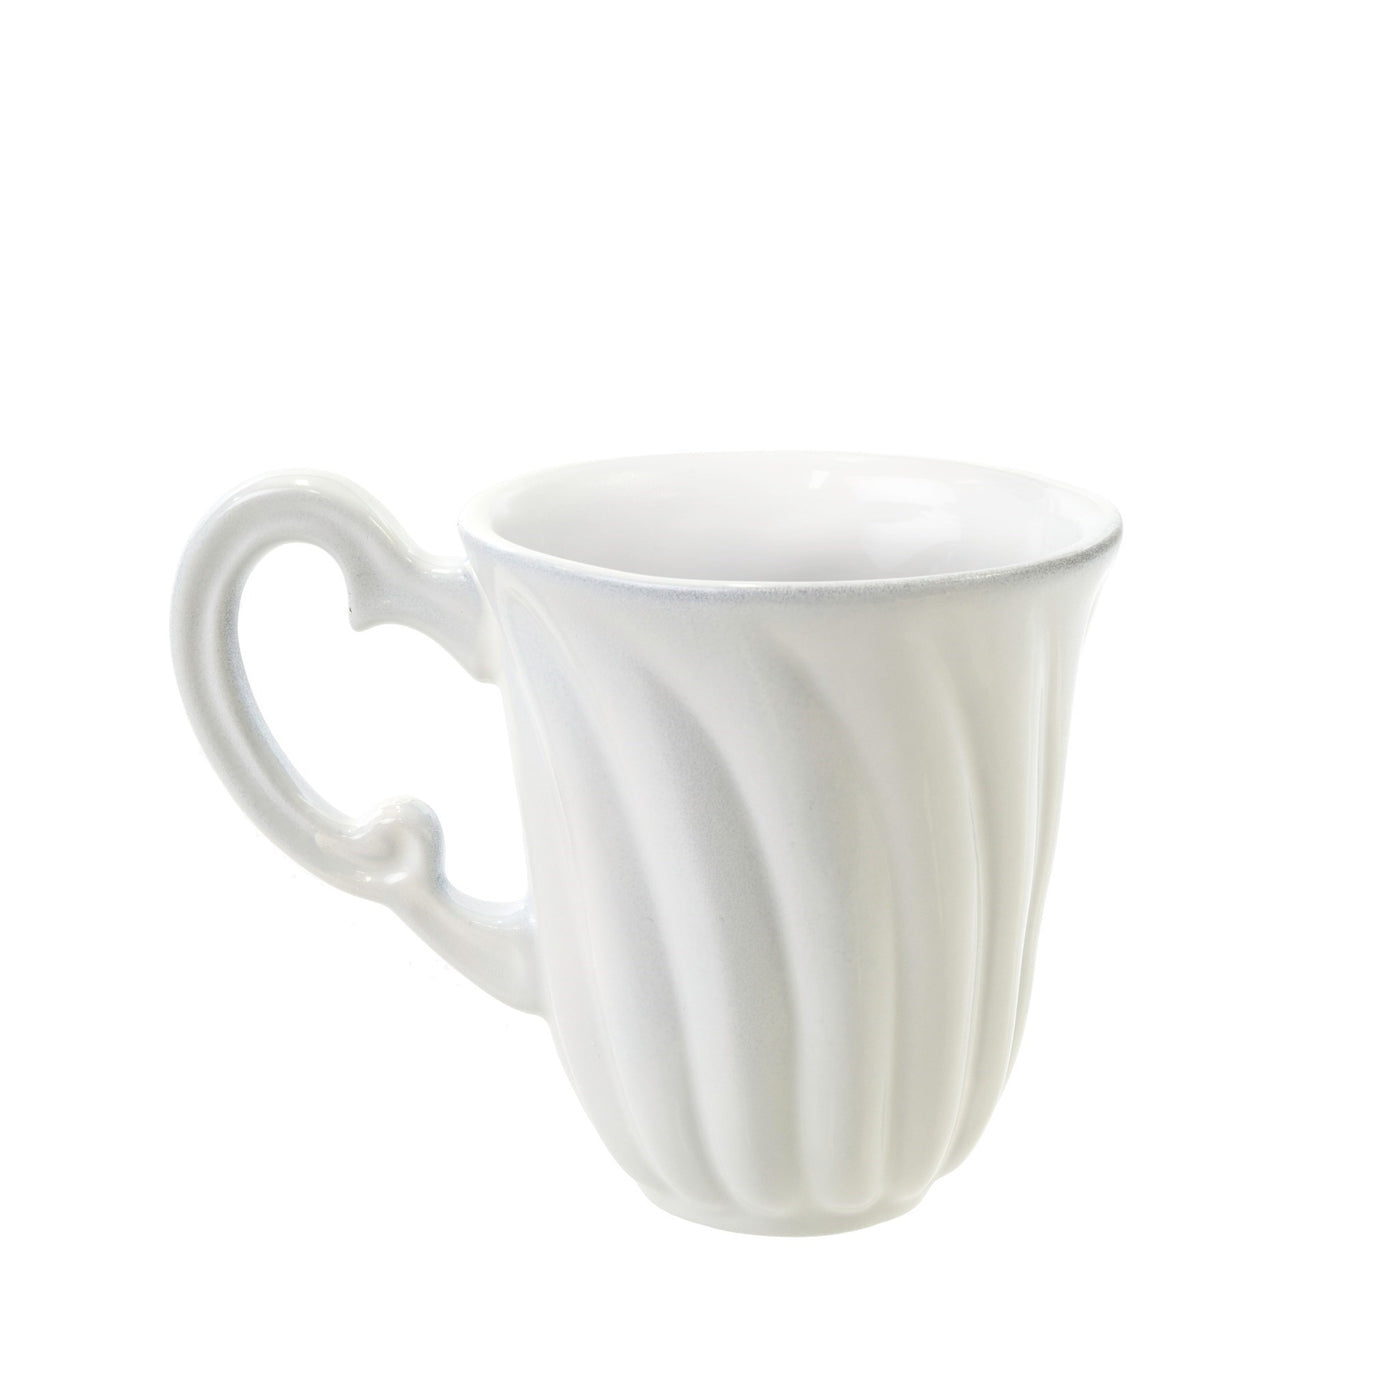 Roma Mug: A white ceramic teacup created with a vintage-inspired ironstone design, it will be a cherished addition to your drinkware collection. SKU: 4-9361 - Available at Avalon Willow Home